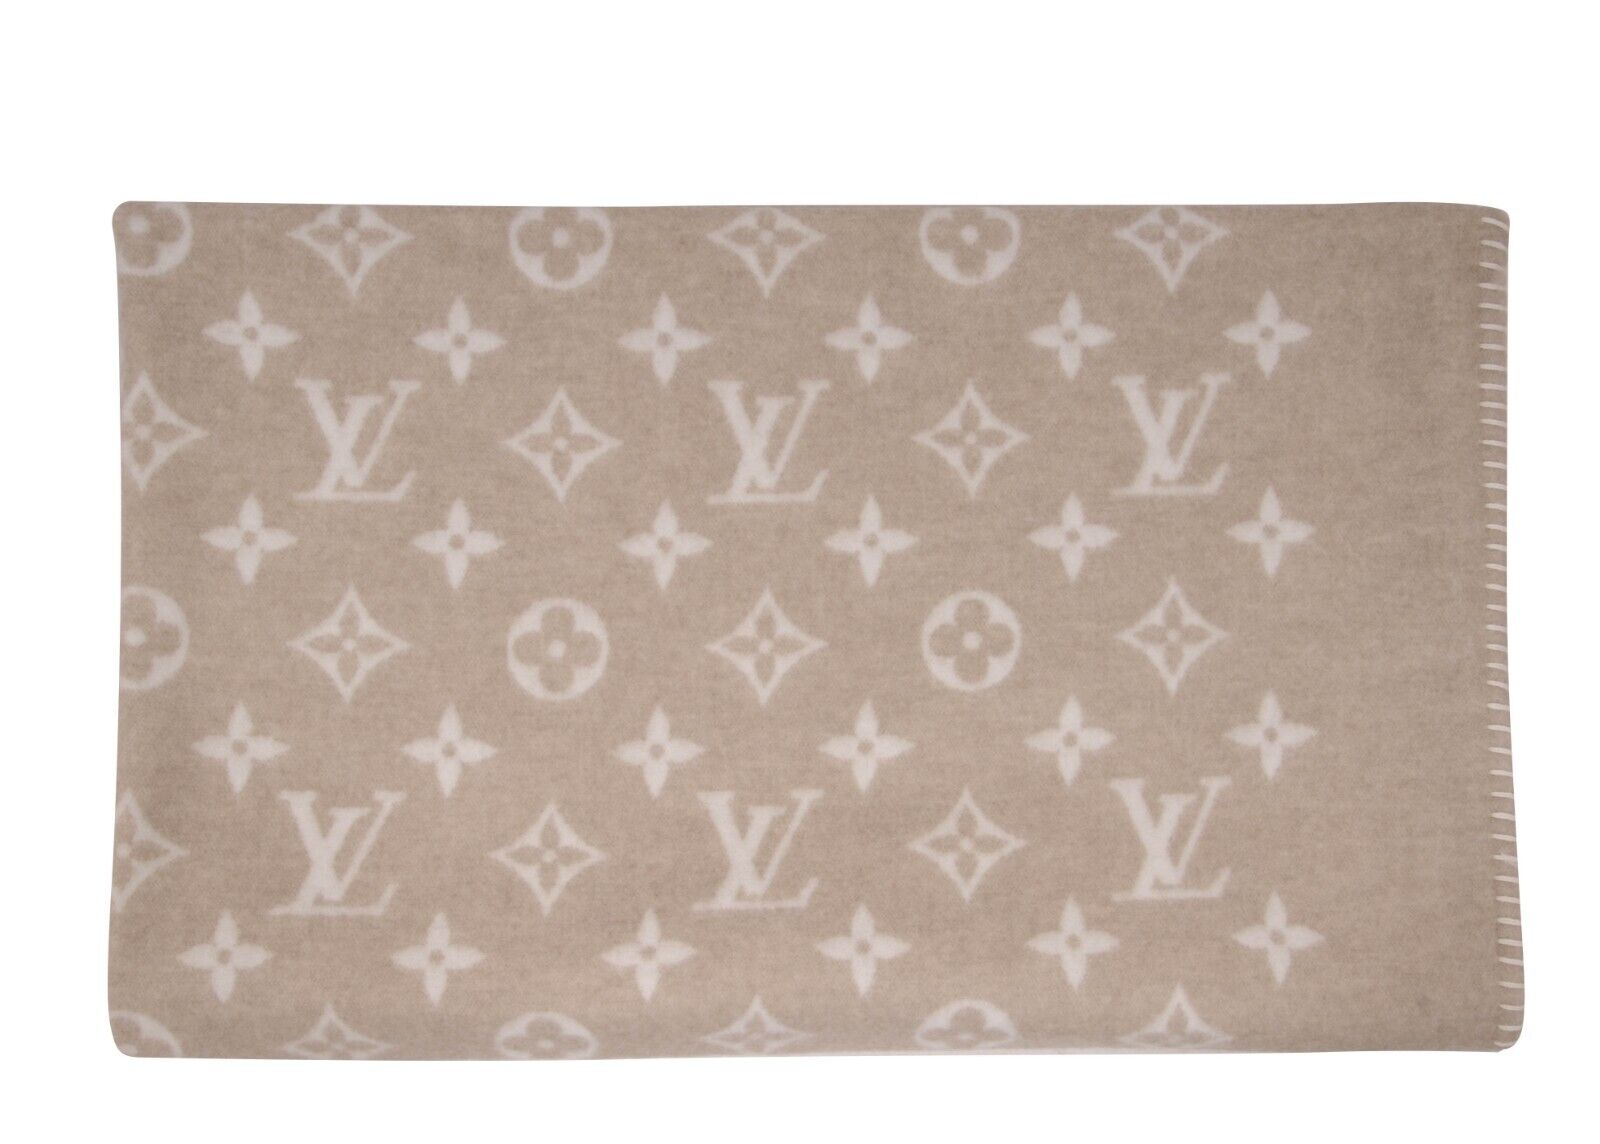 LV blanket with gift box